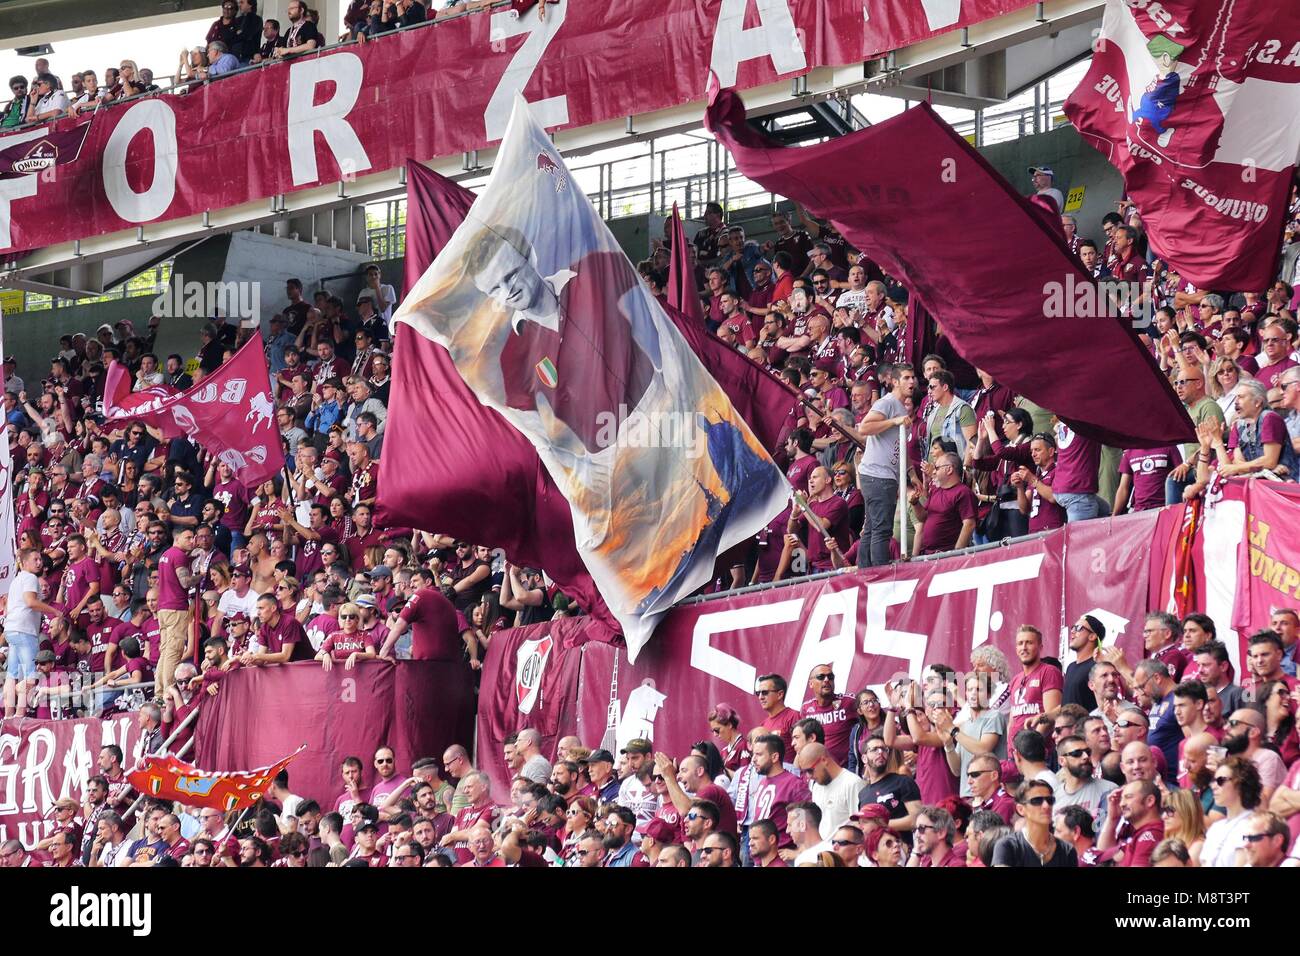 Turin Italy May 25 2017 Supporters of Torino FC celebrating  the rebuild of glorious Filadelfia stadium flag with effigy of beloved ancient captain Stock Photo